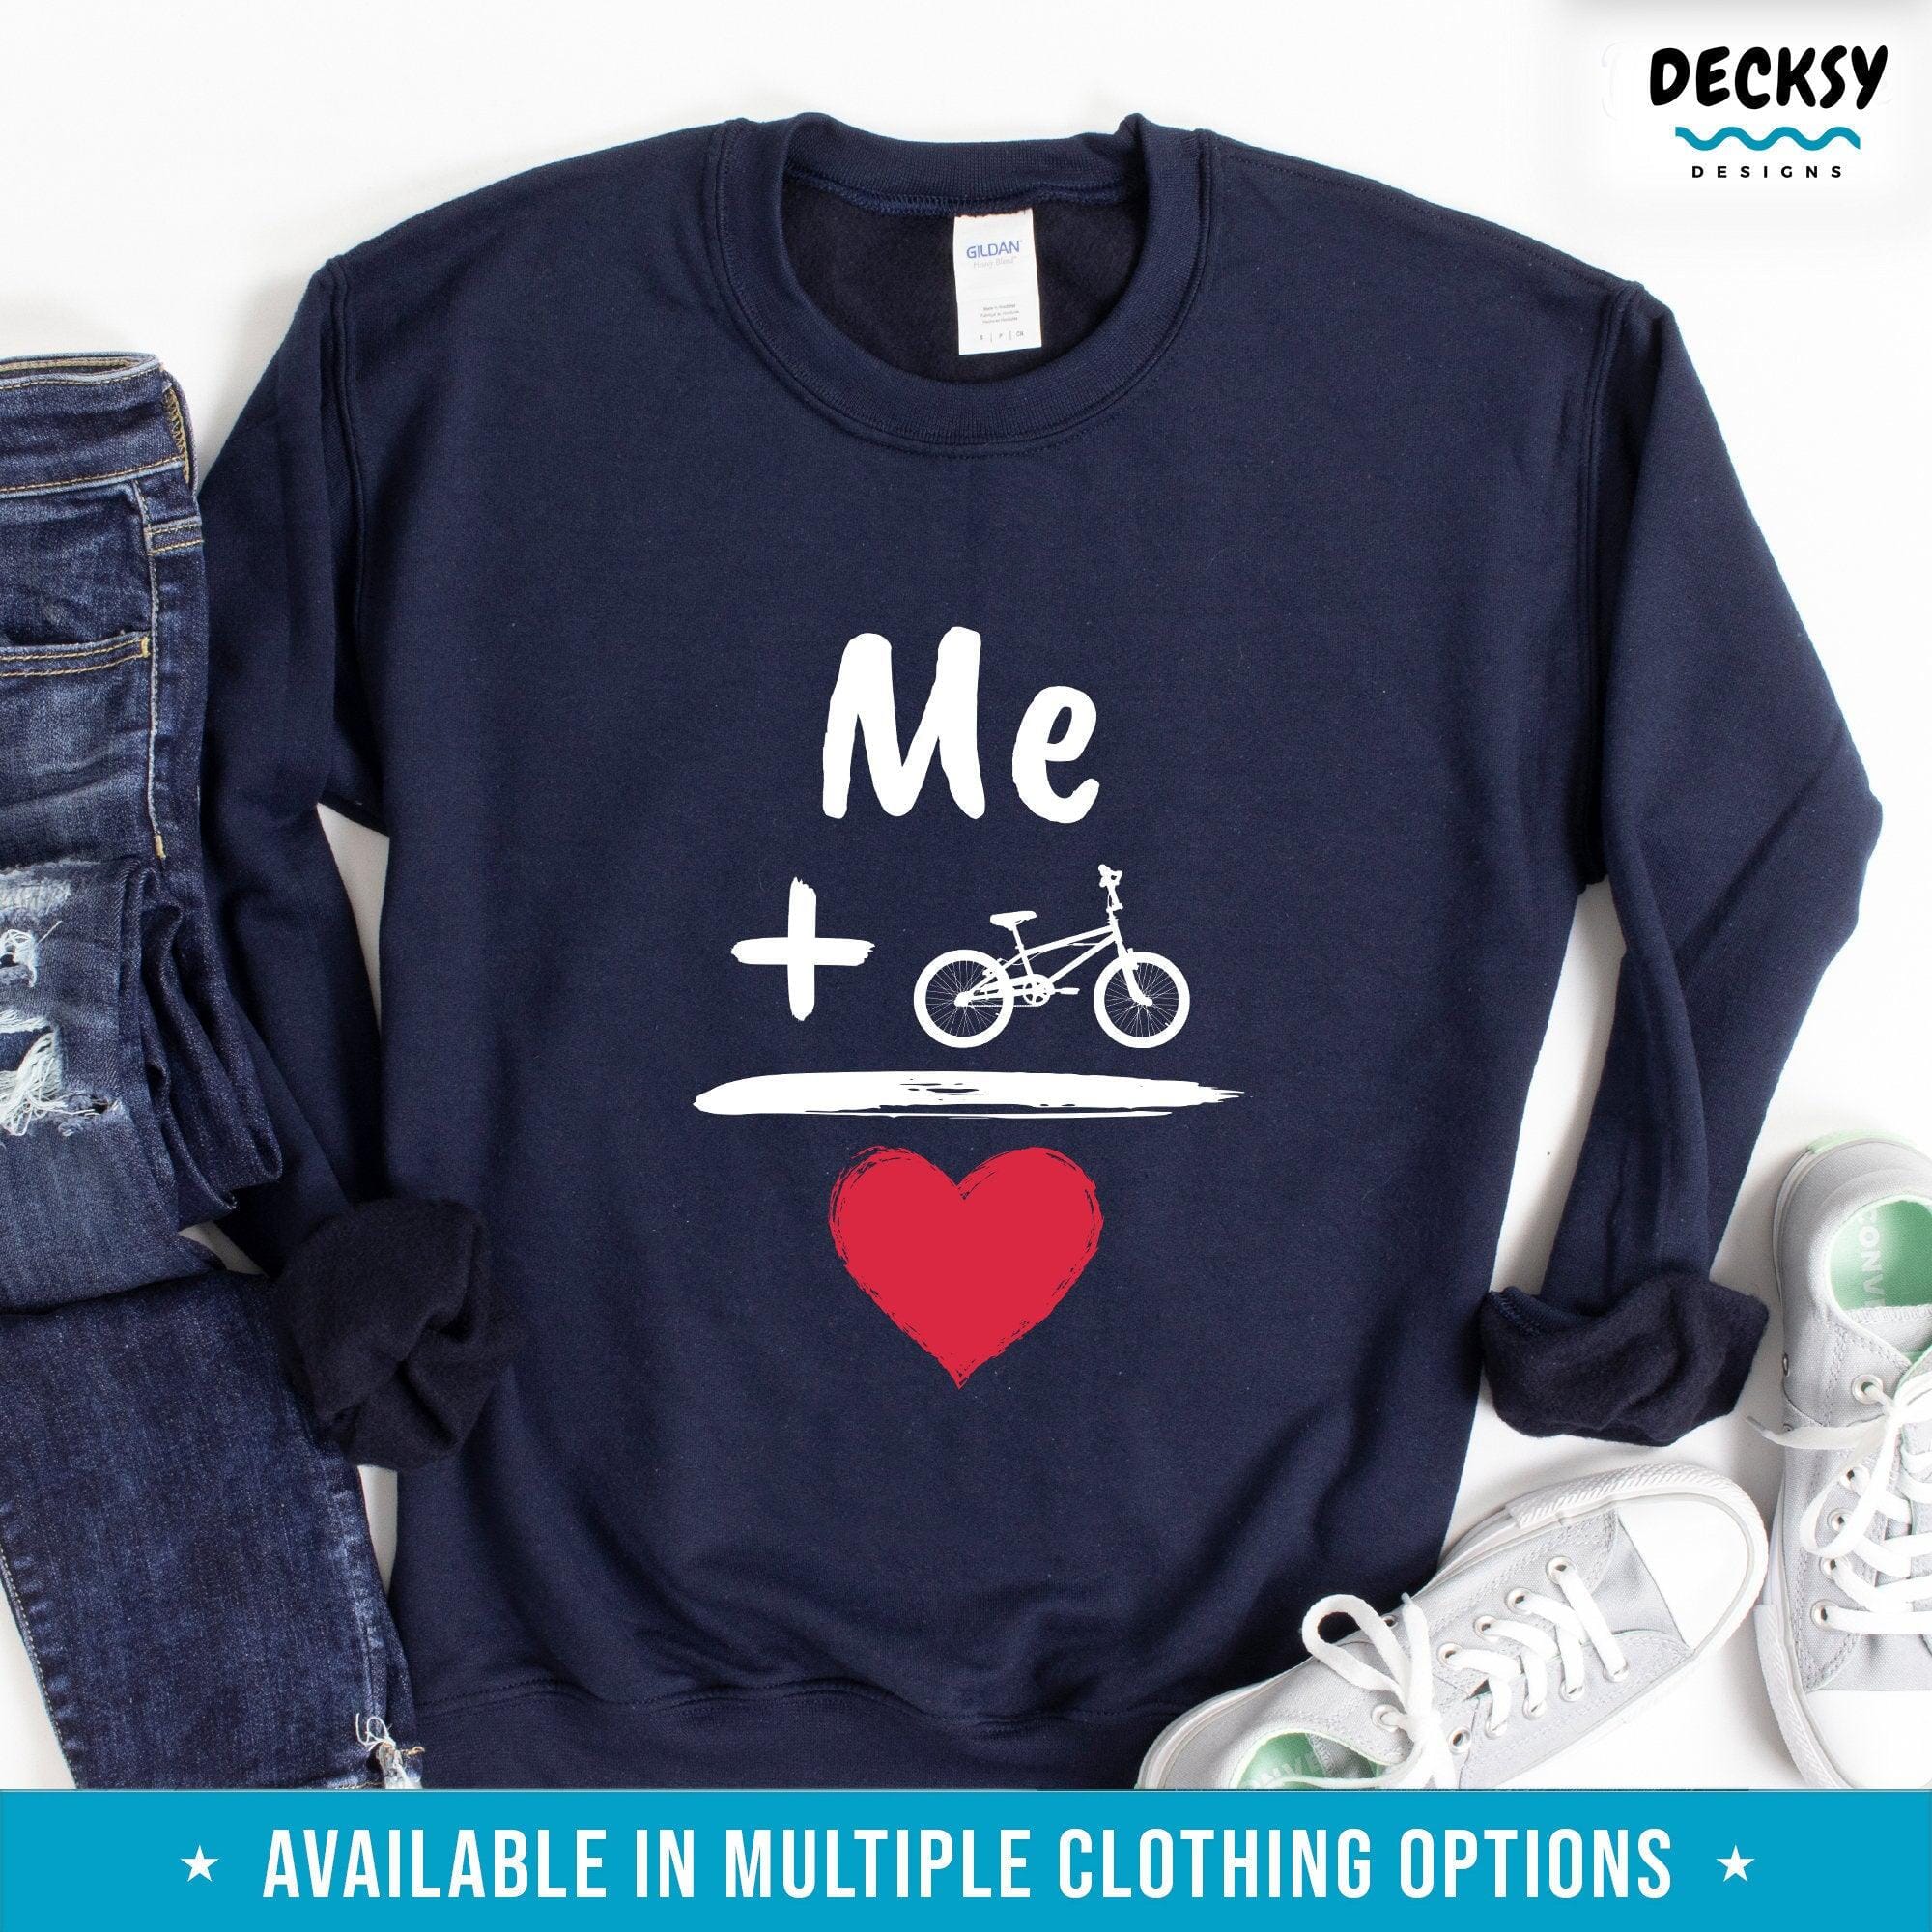 Cycling T Shirt, Bicycle Gift-Clothing:Gender-Neutral Adult Clothing:Tops & Tees:T-shirts:Graphic Tees-DecksyDesigns